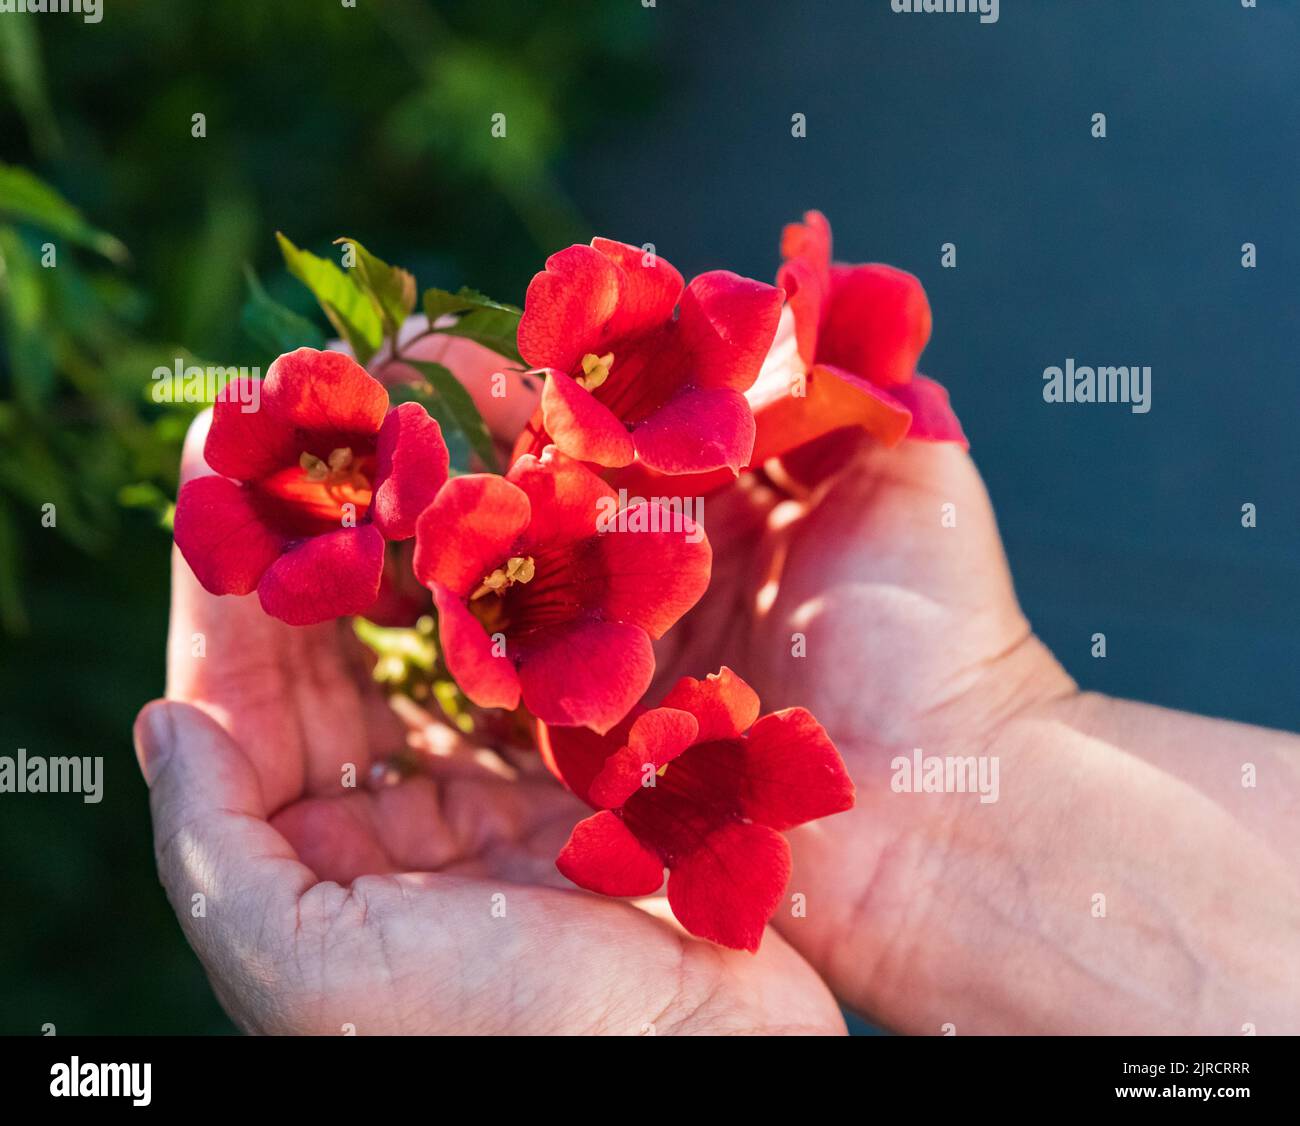 Flowers in hands. Orange trumpet creeper or trumpet vine in woman hand. Campsis radicans or trumpet creeper, also known in North America as cow itch v Stock Photo